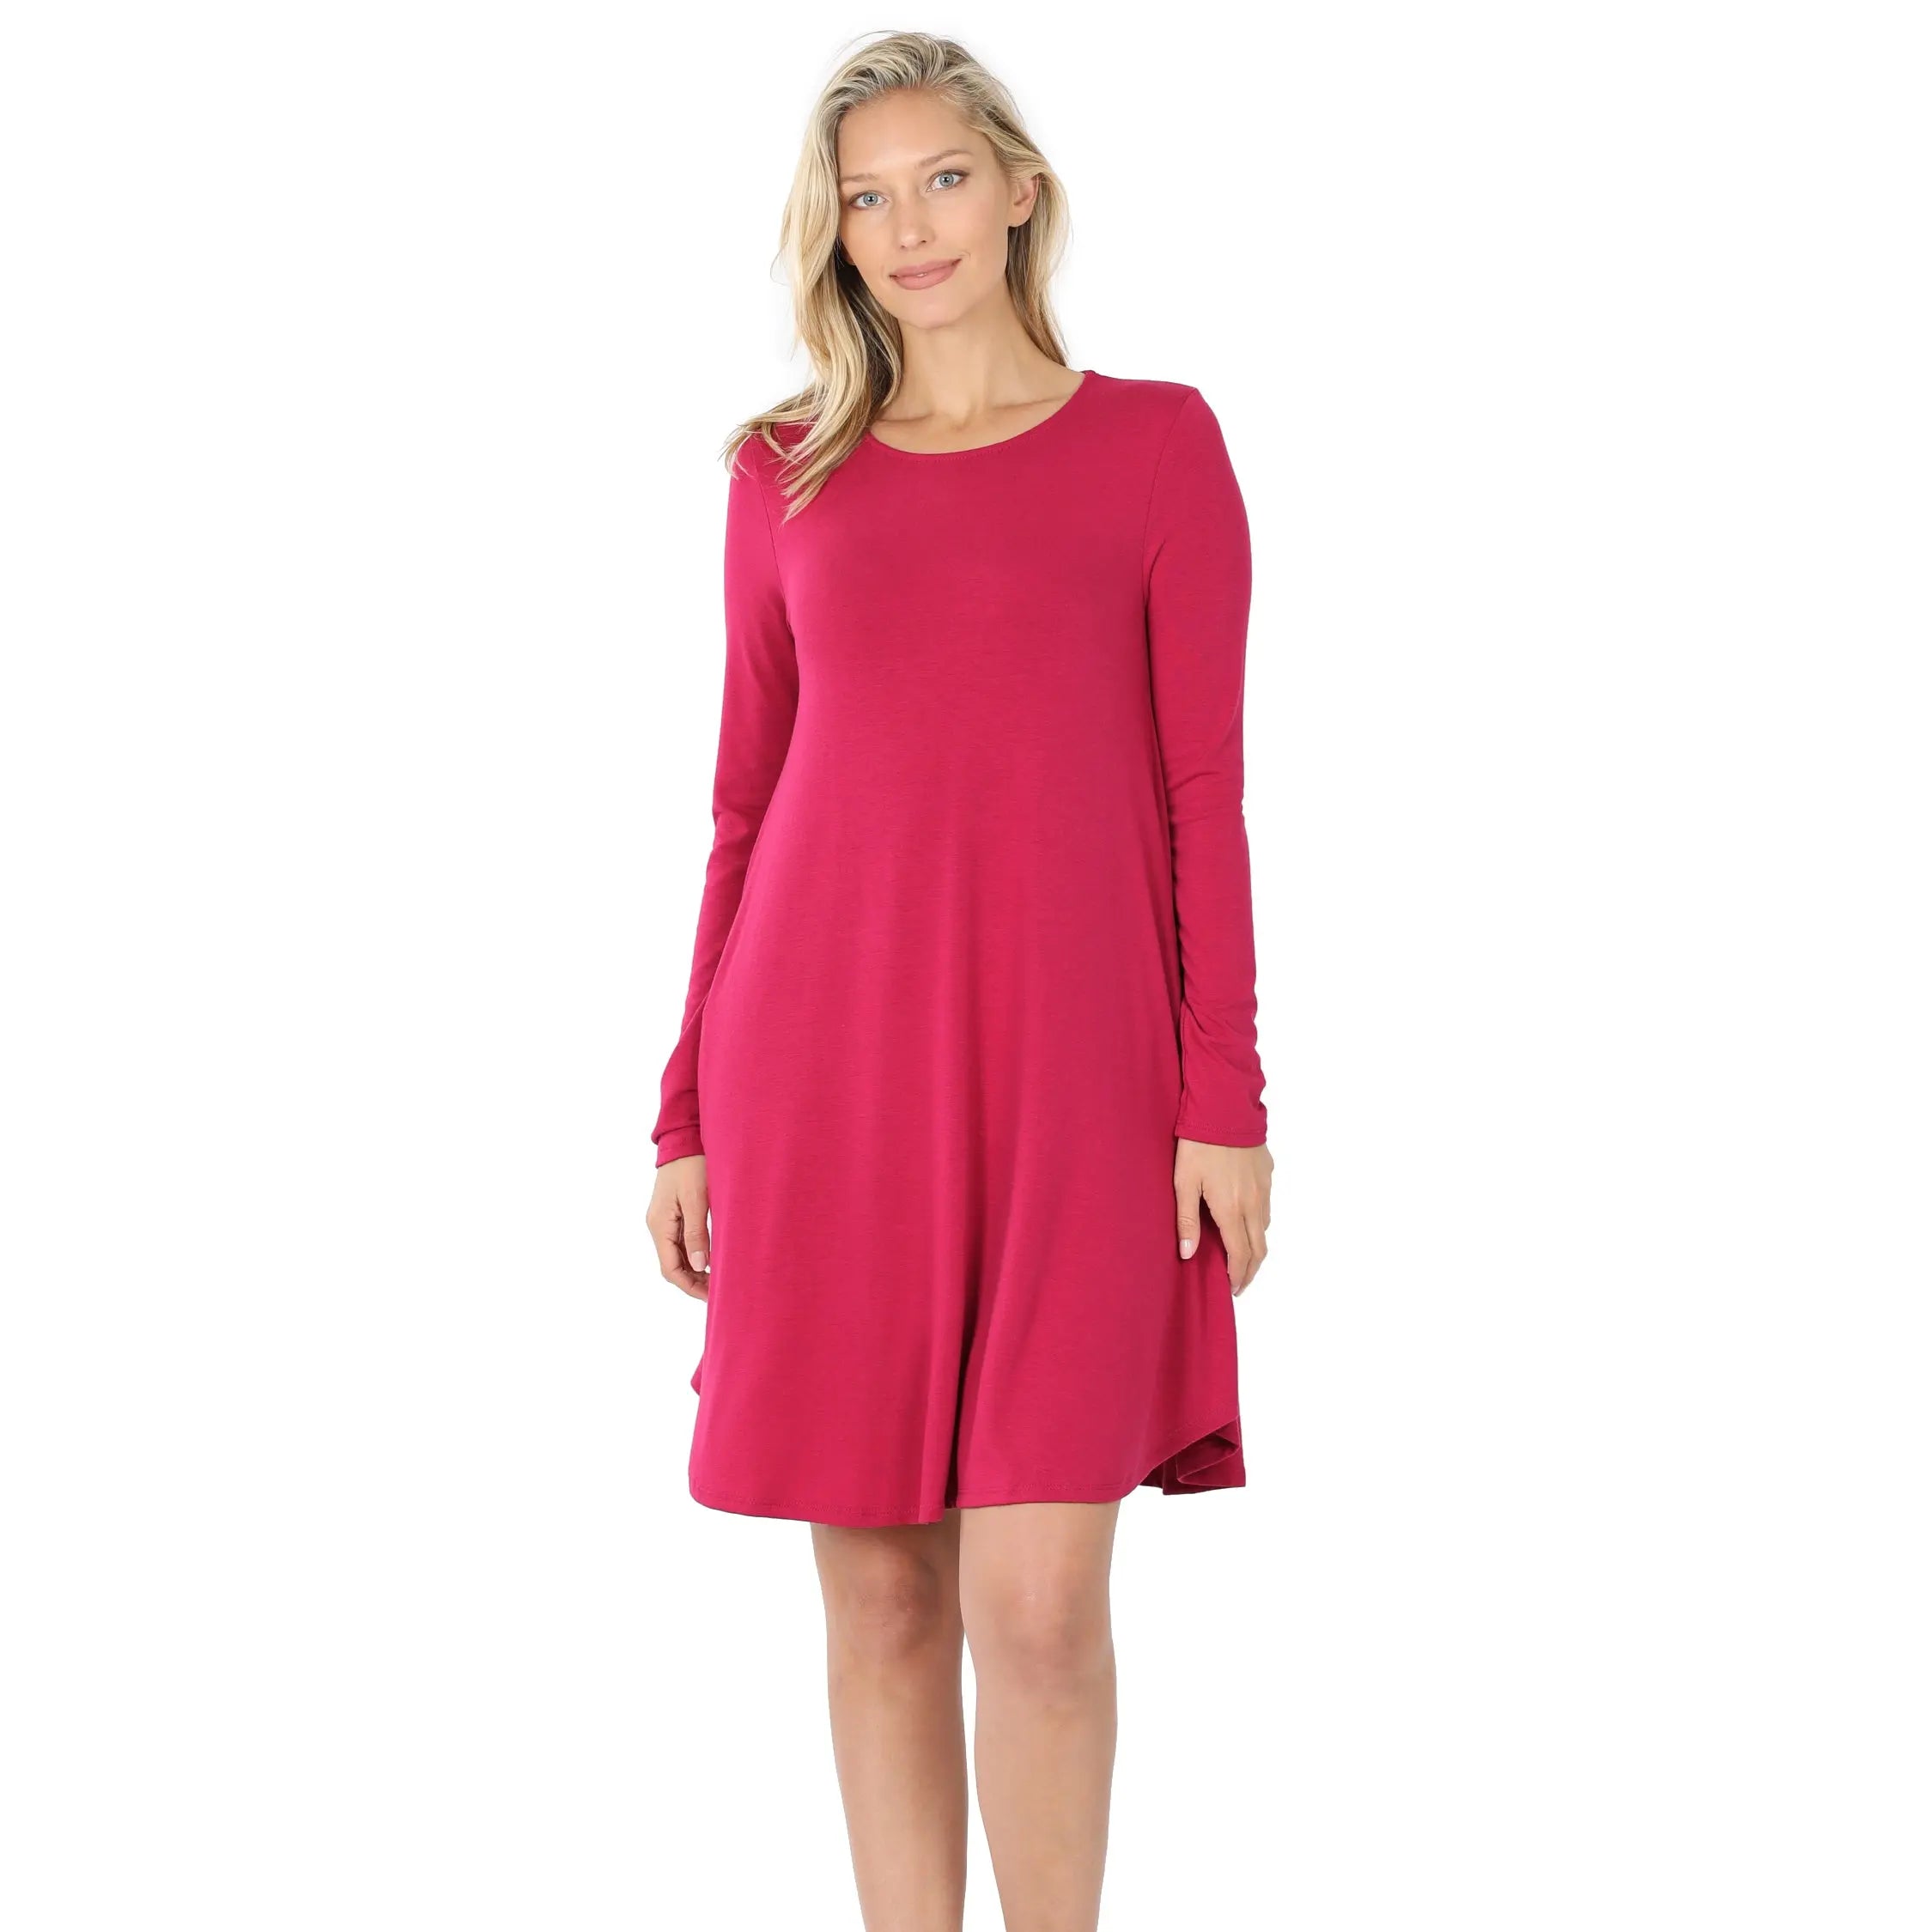 LONG SLEEVE ROUND HEM A-LINE DRESS WITH SIDE POCKETS - Cathy,s new look 